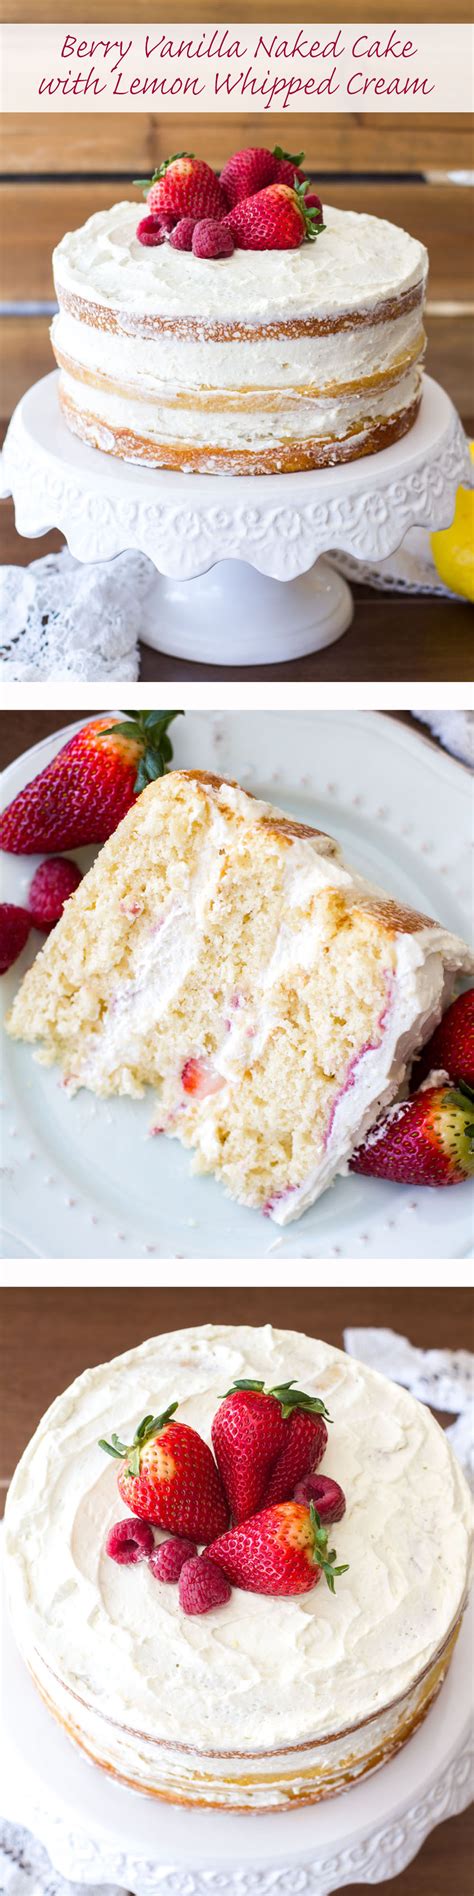 Berry Vanilla Naked Cake With Lemon Whipped Cream Just Desserts Cake Desserts Delicious